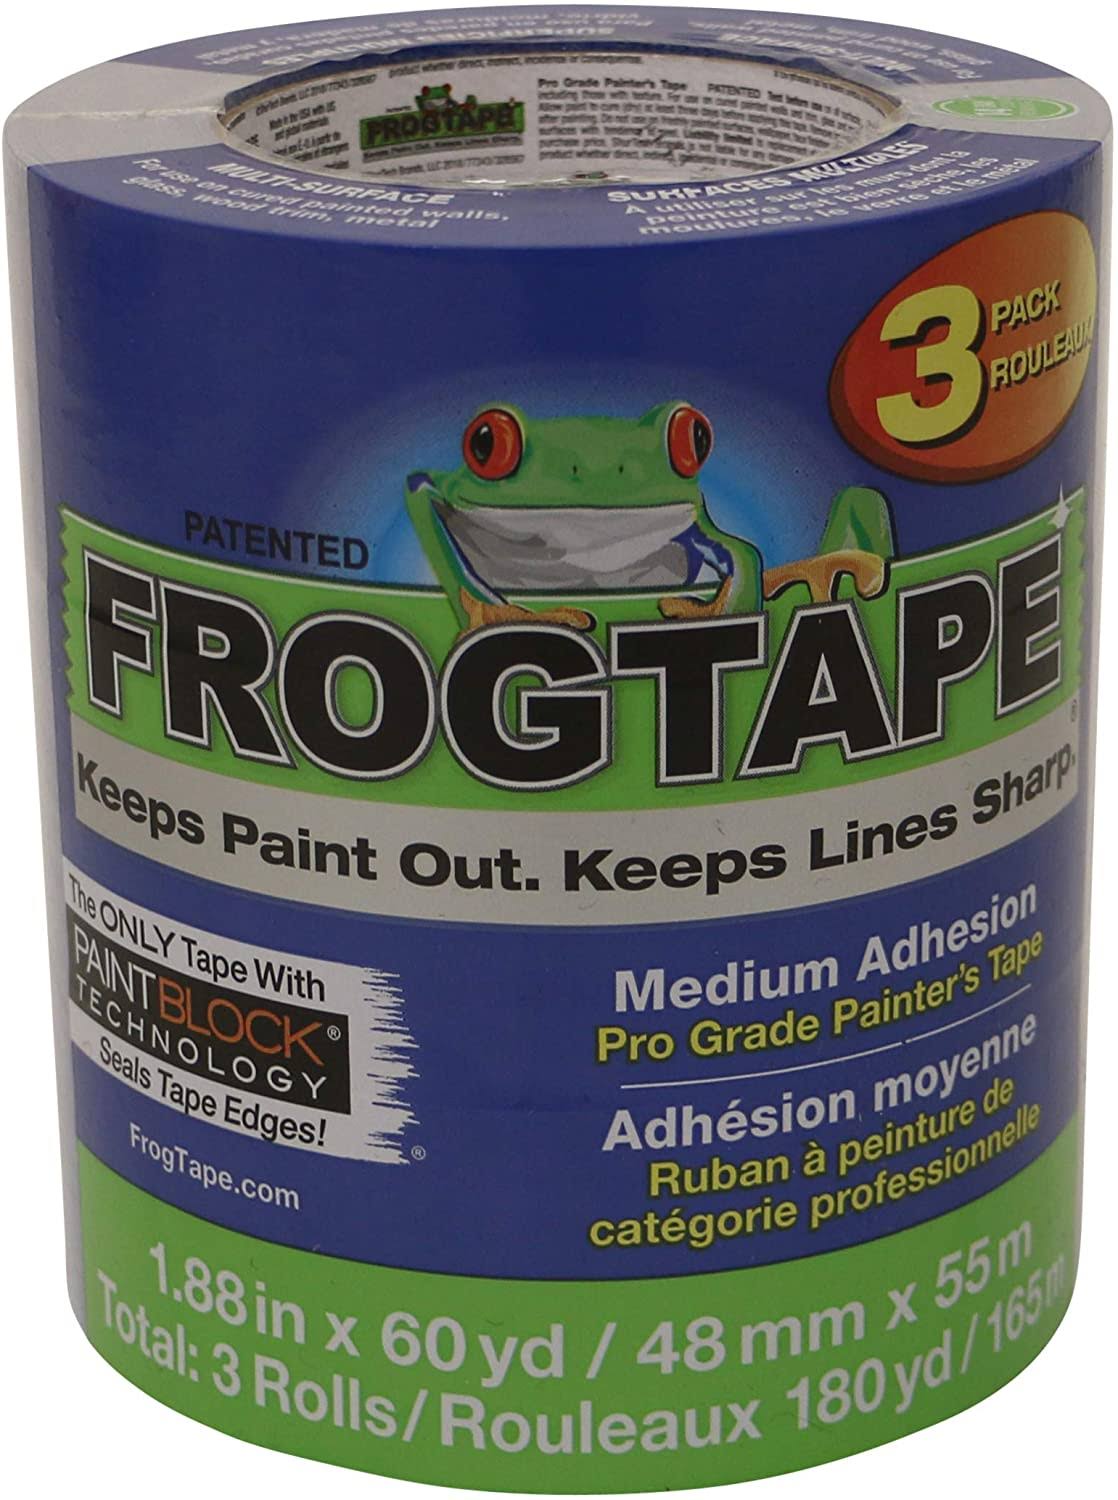 Shurtape CP-130 FrogTape Brand Pro Grade Painter's Tape: 2 in x 60 yds. Blue 3-pack - Pack - Find Tape